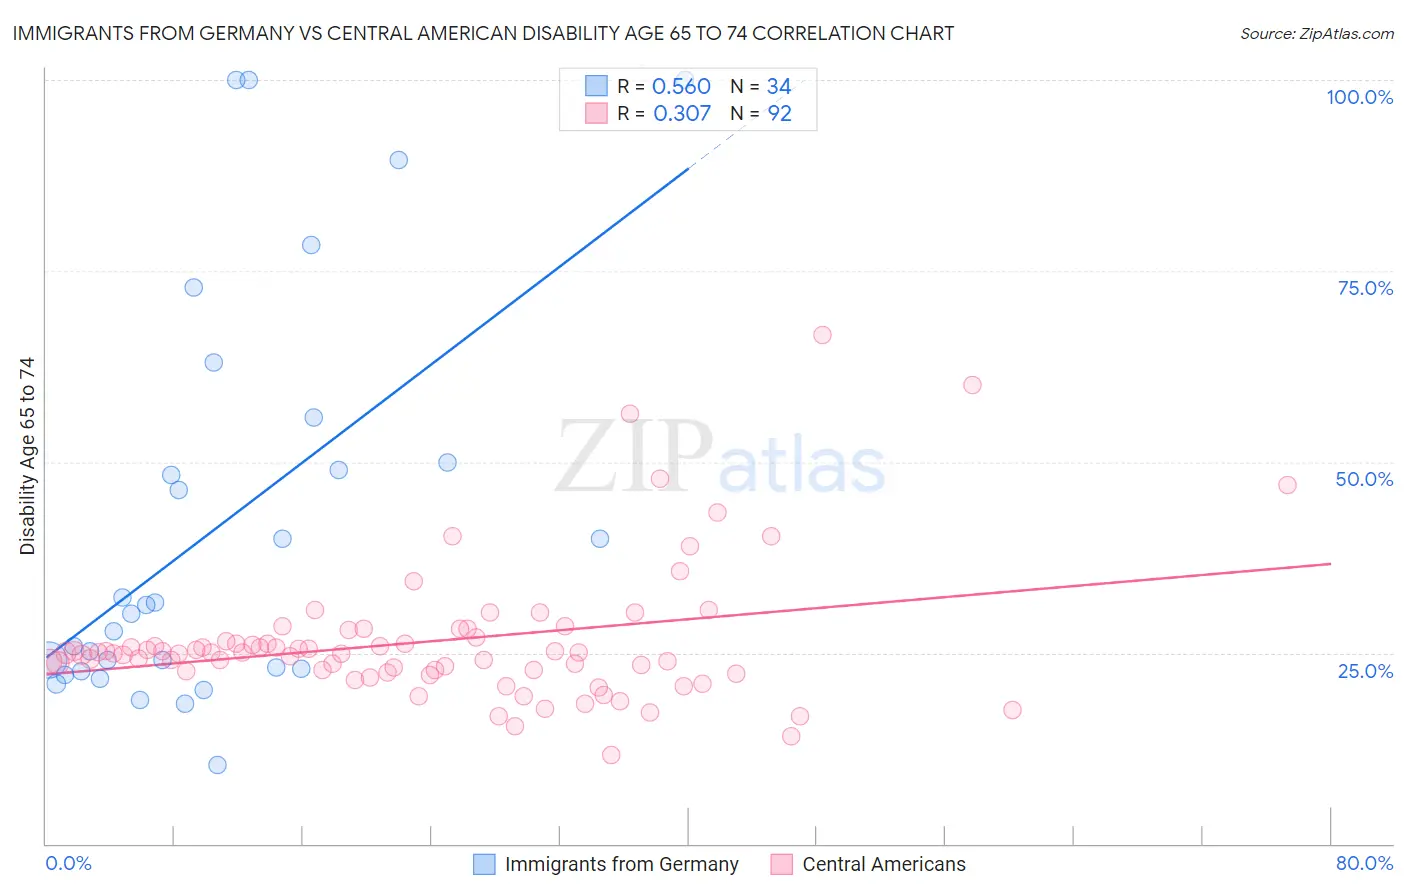 Immigrants from Germany vs Central American Disability Age 65 to 74